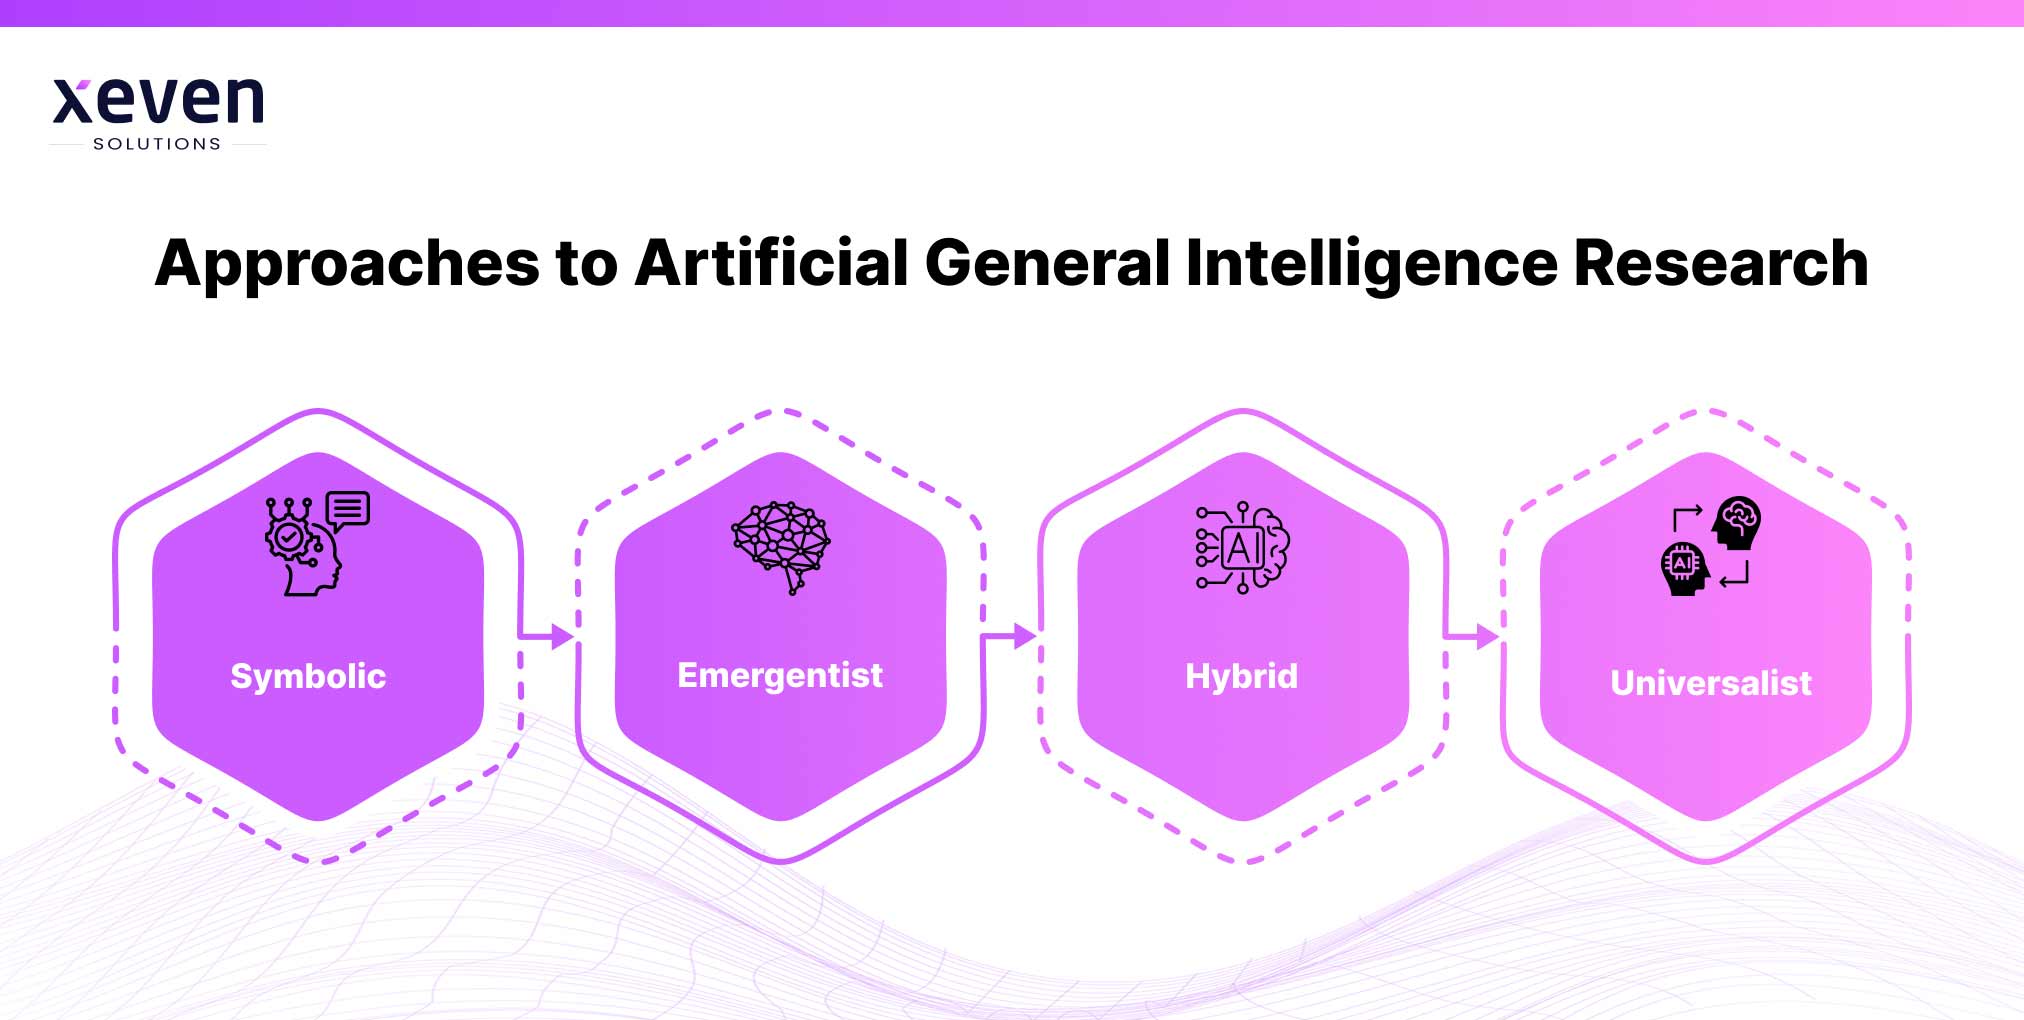 Approaches to Artificial General Intelligence Research